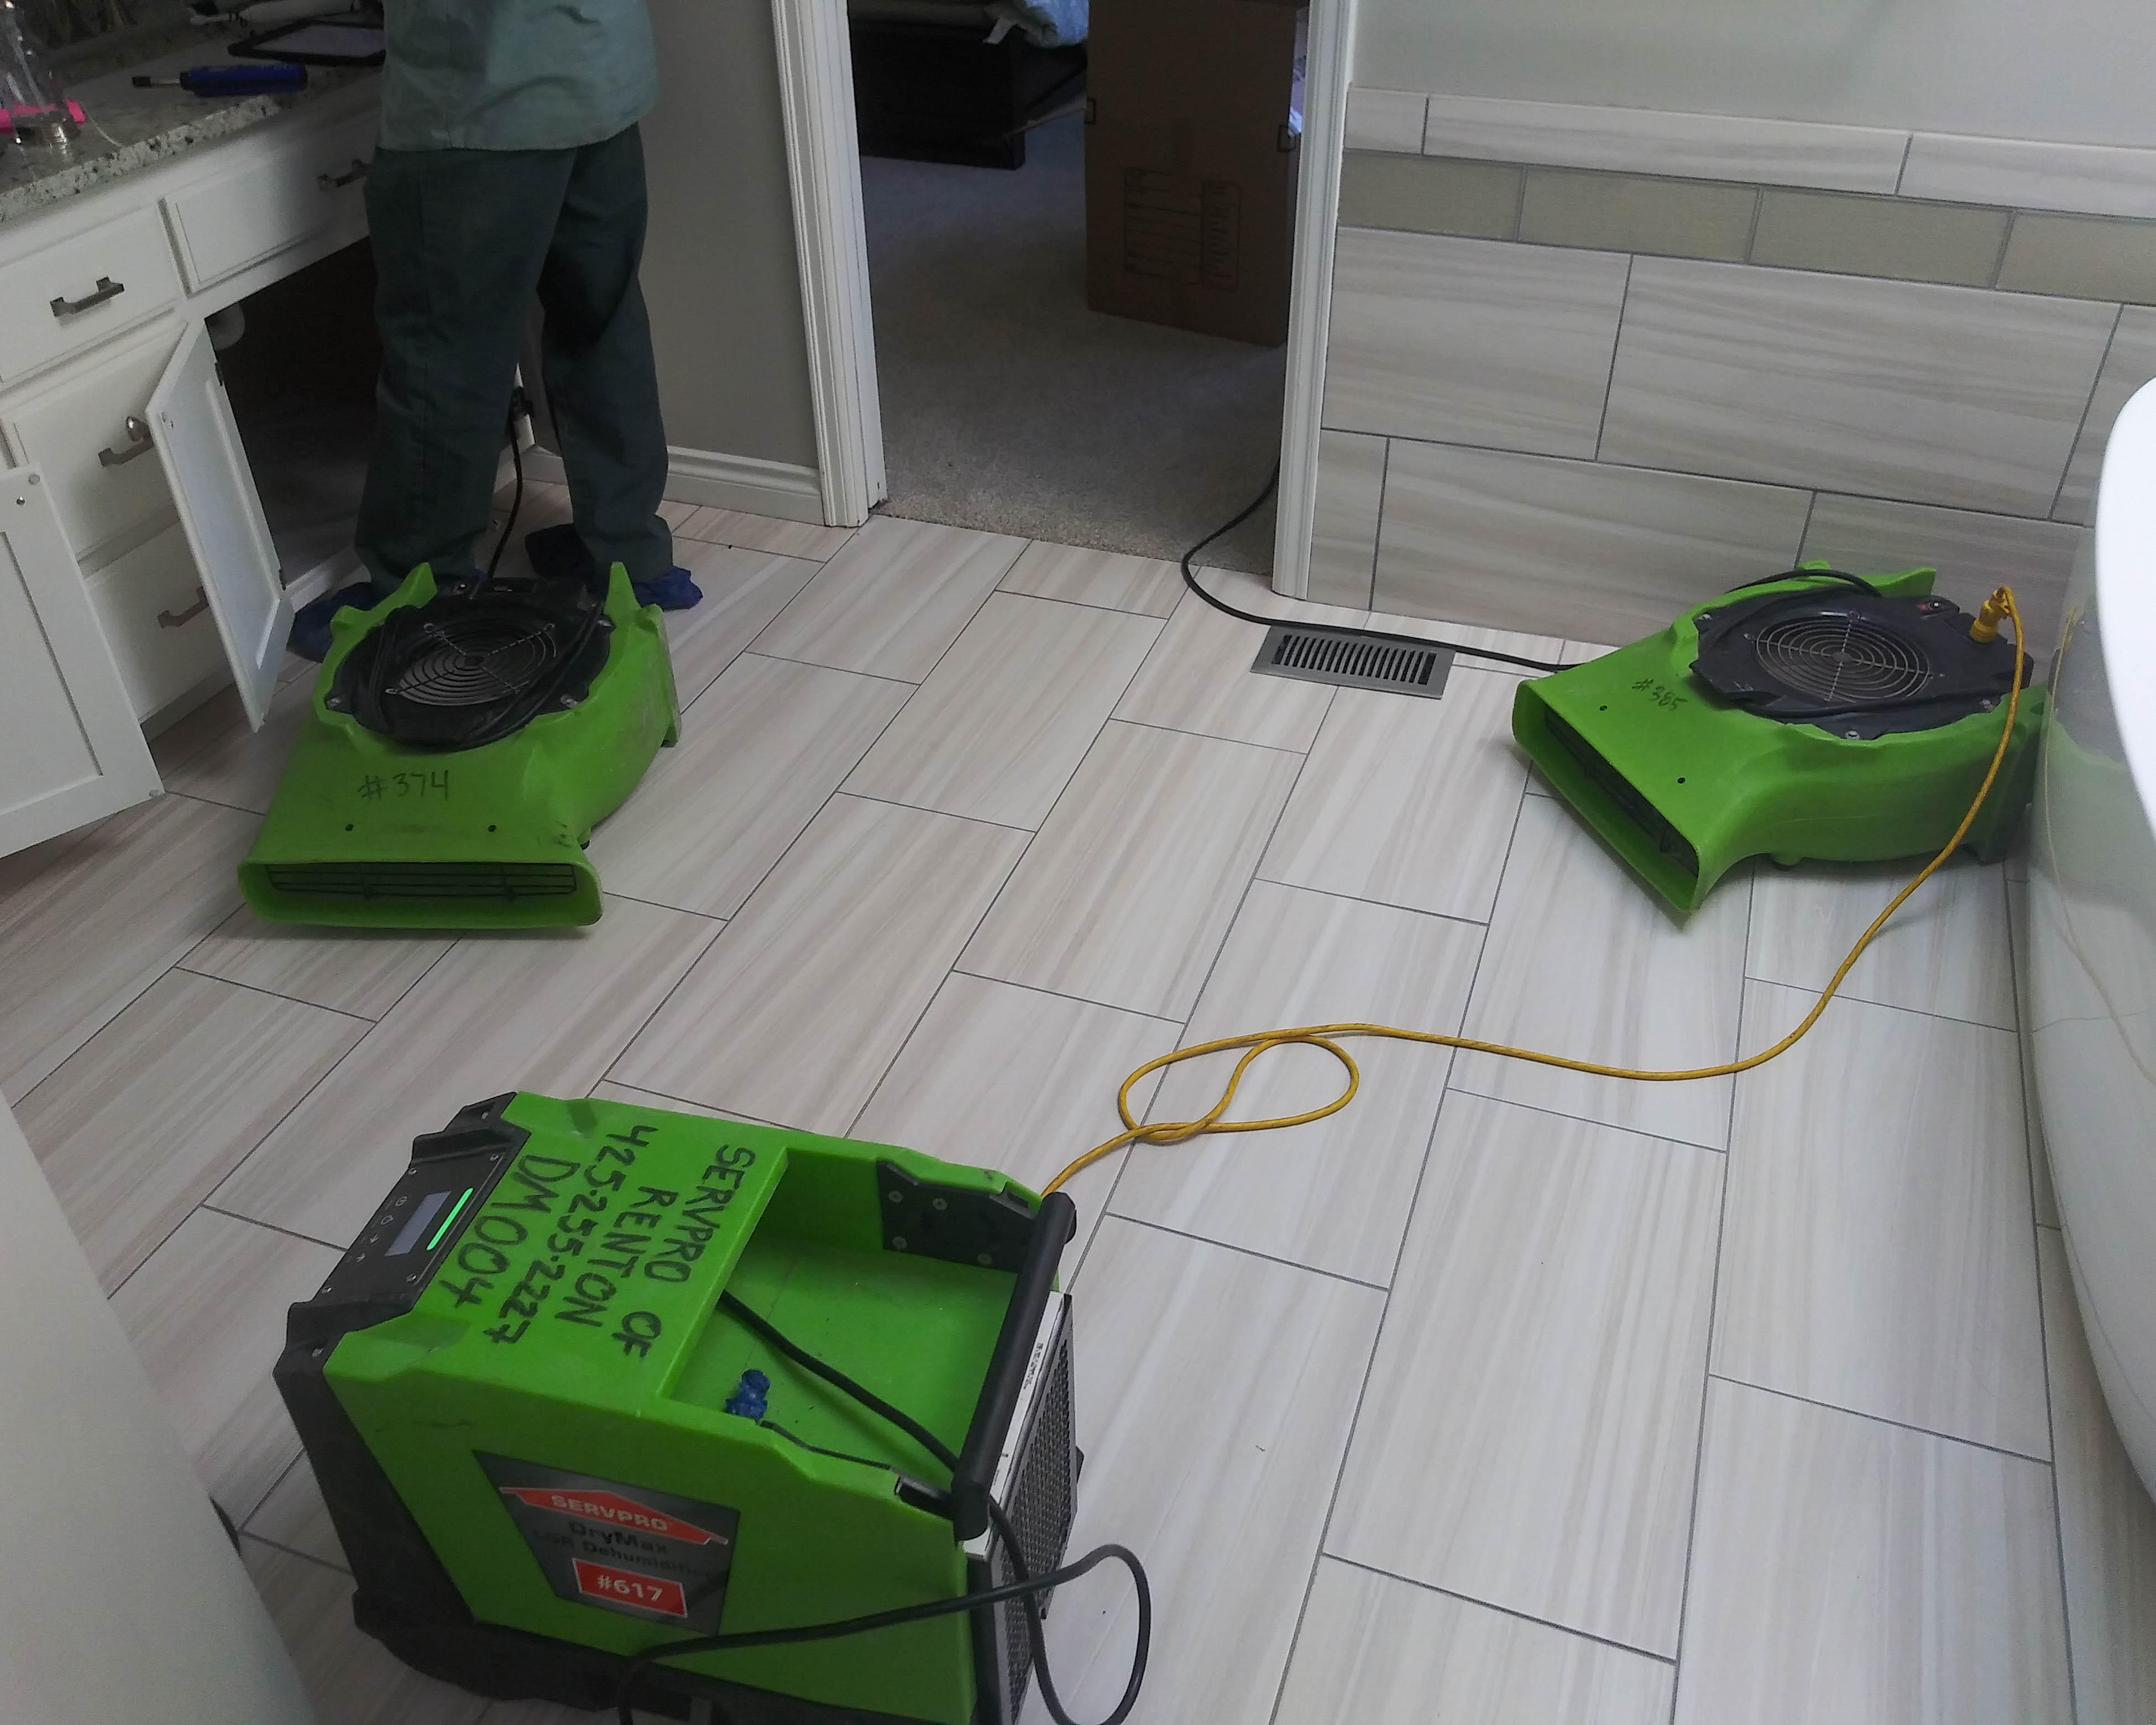 Who to call for Water Damage in your Seattle, WA home area? Call SERVPRO of South/West Seattle.